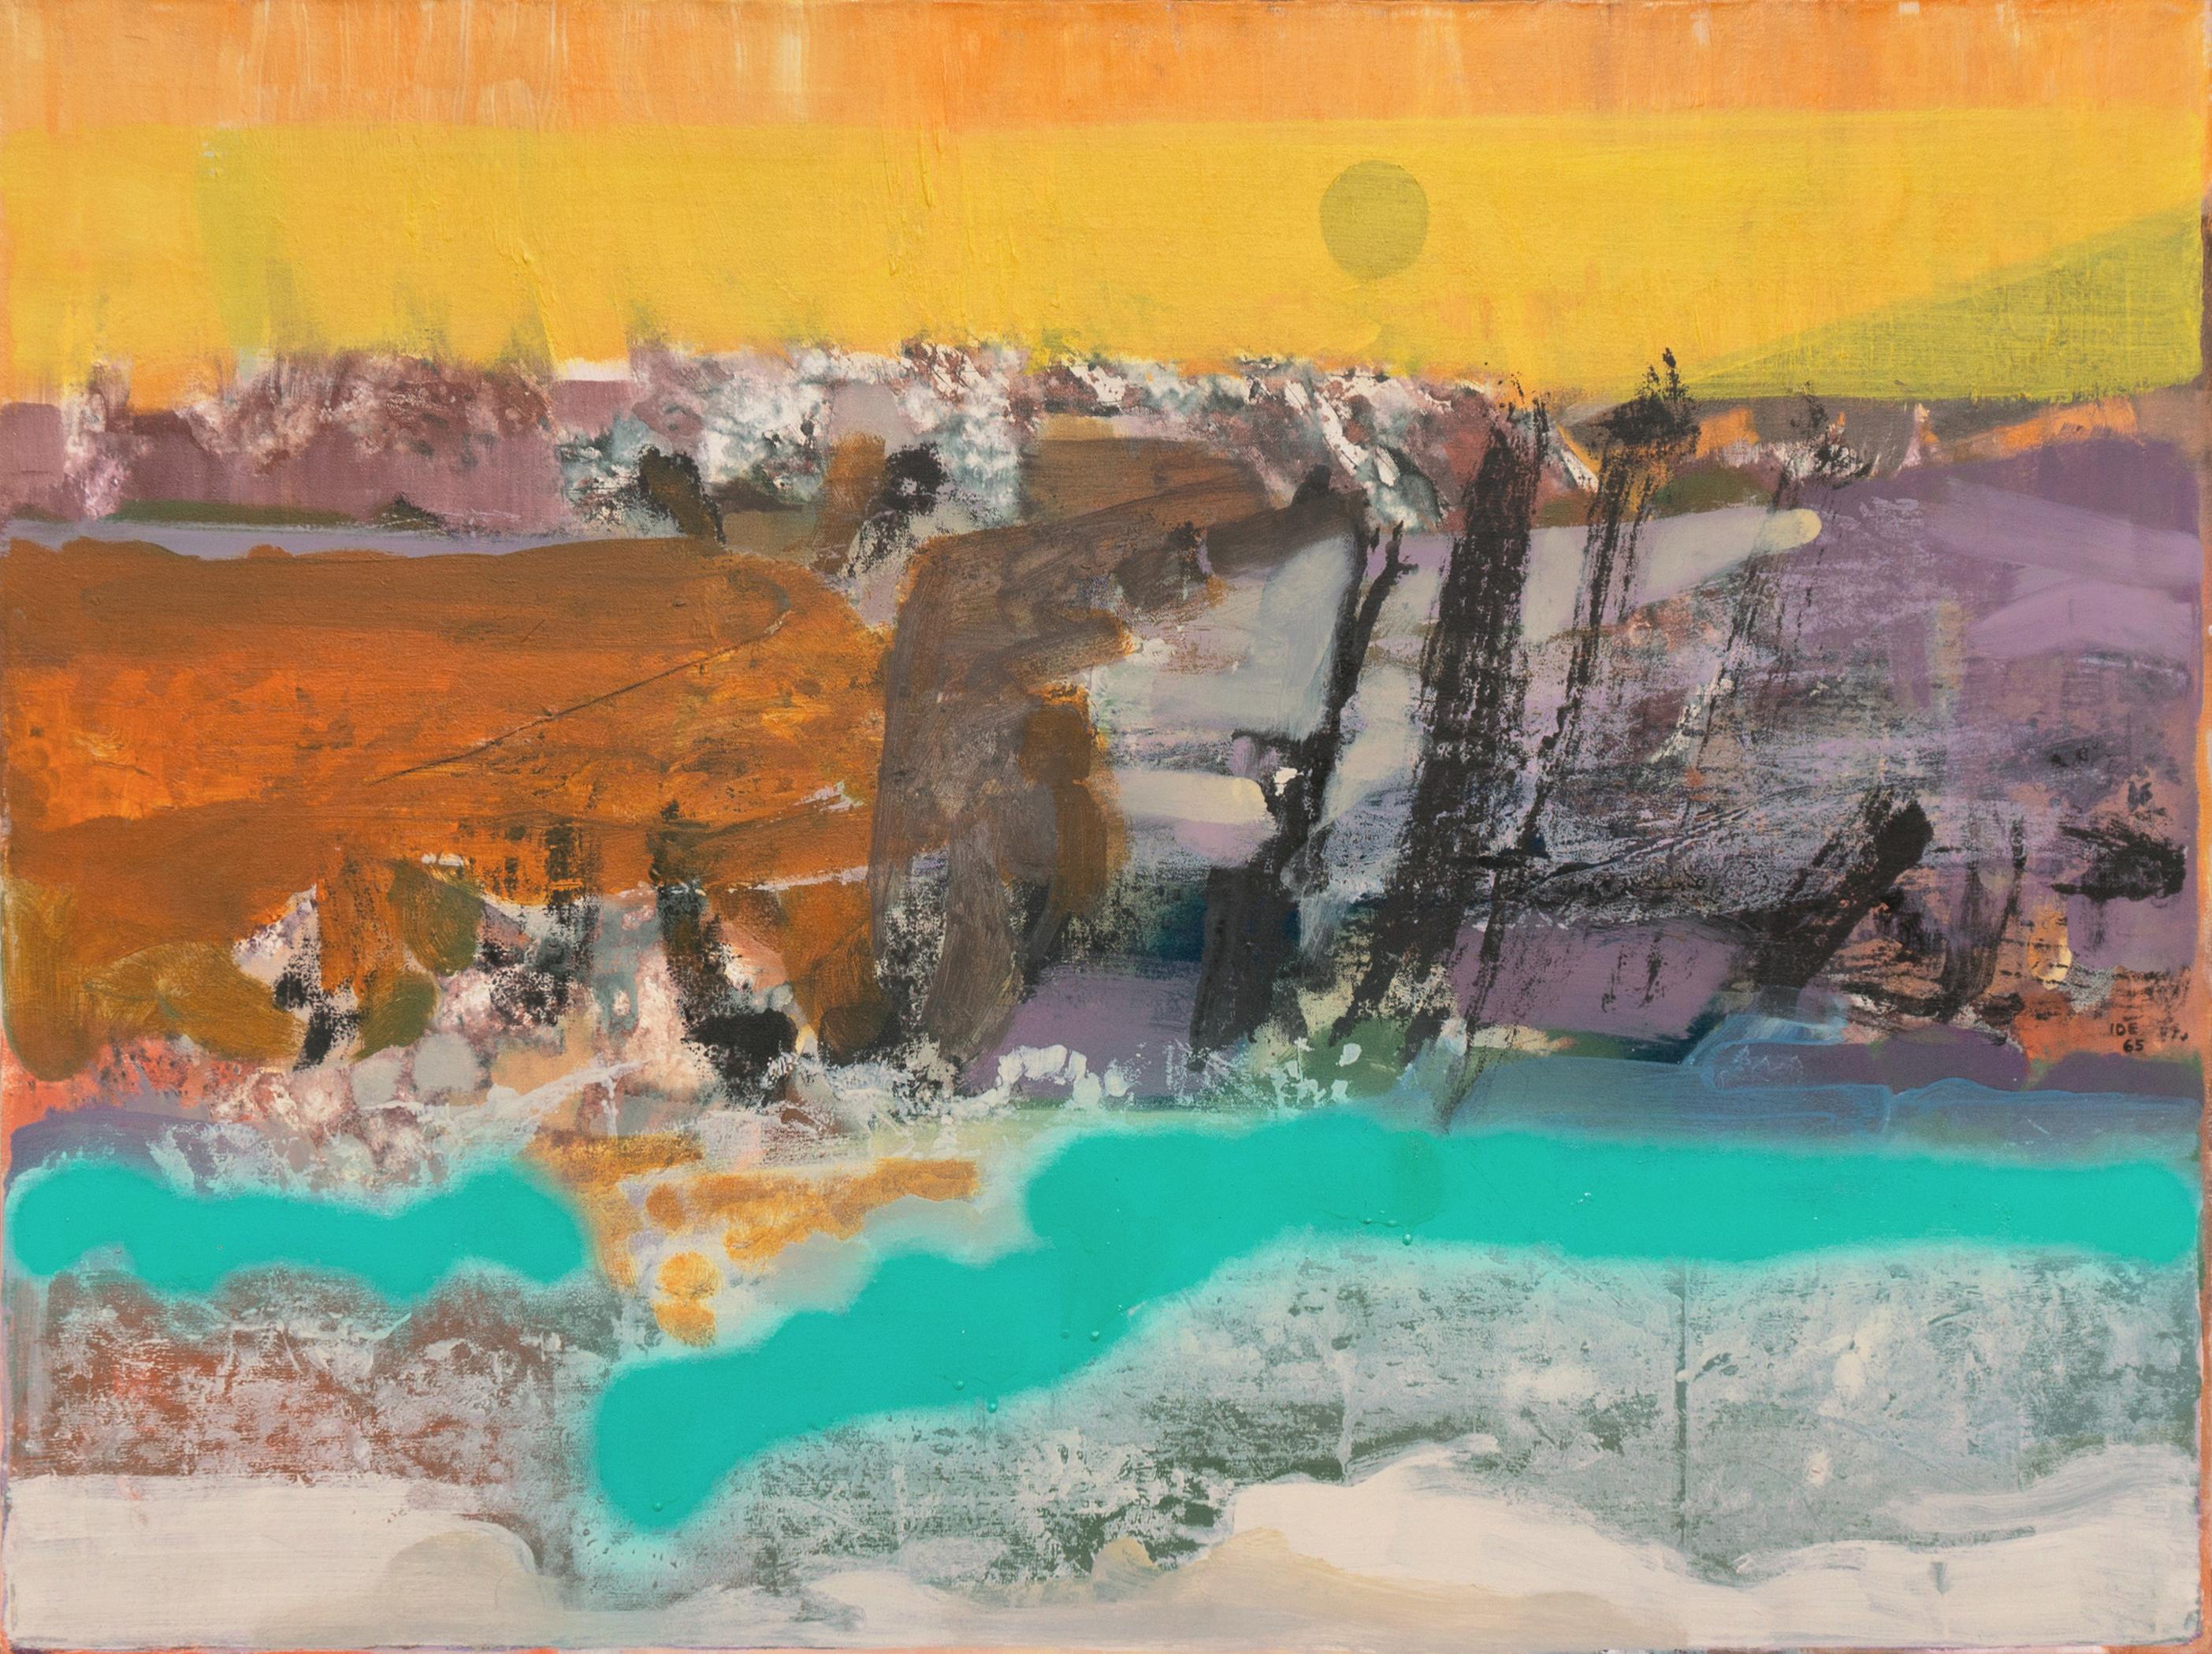 Tom Ide Abstract Painting - 'Canyon River', San Francisco Bay Area Abstraction, Mid-Century, Maxwell Gallery